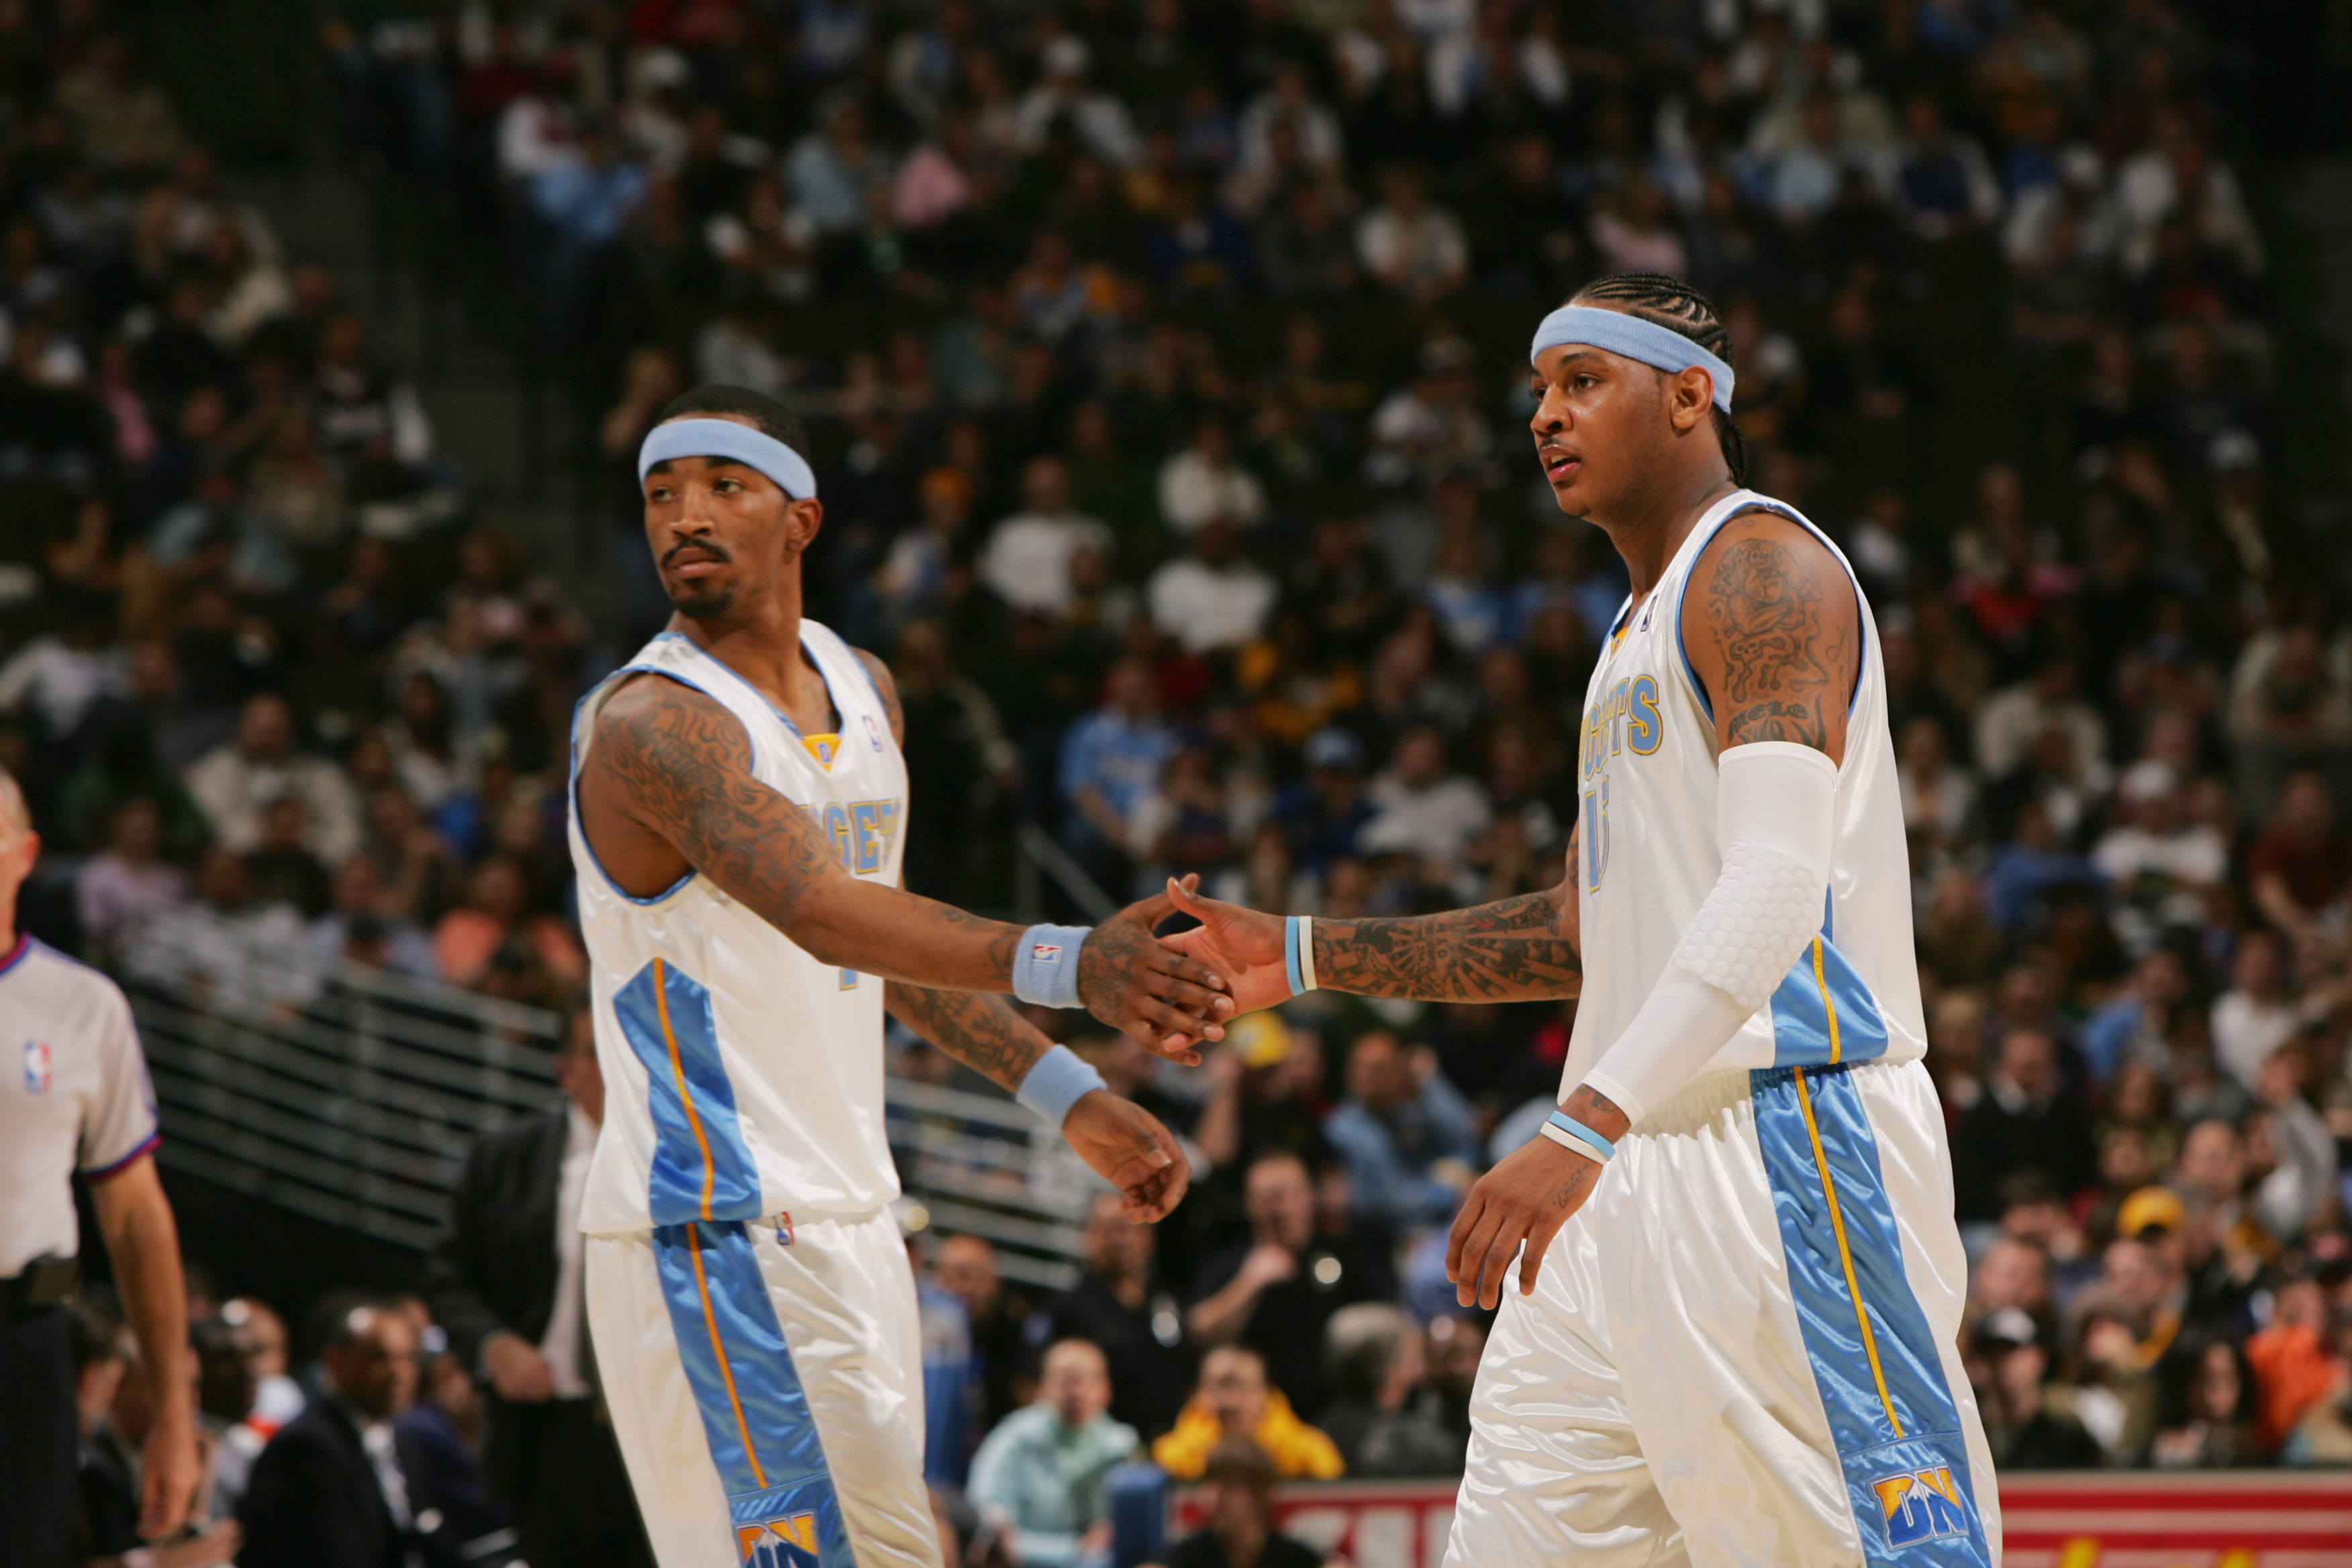 DENVER - JANUARY 22:  J.R. Smith #1 and Carmelo Anthony #15 of the Denver Nuggets celebrate a play during the NBA game against the Memphis Grizzlies at the Pepsi Center on January 22, 2007 in Denver, Colorado. The Nuggets won 98-115, in Anthony's debut ga